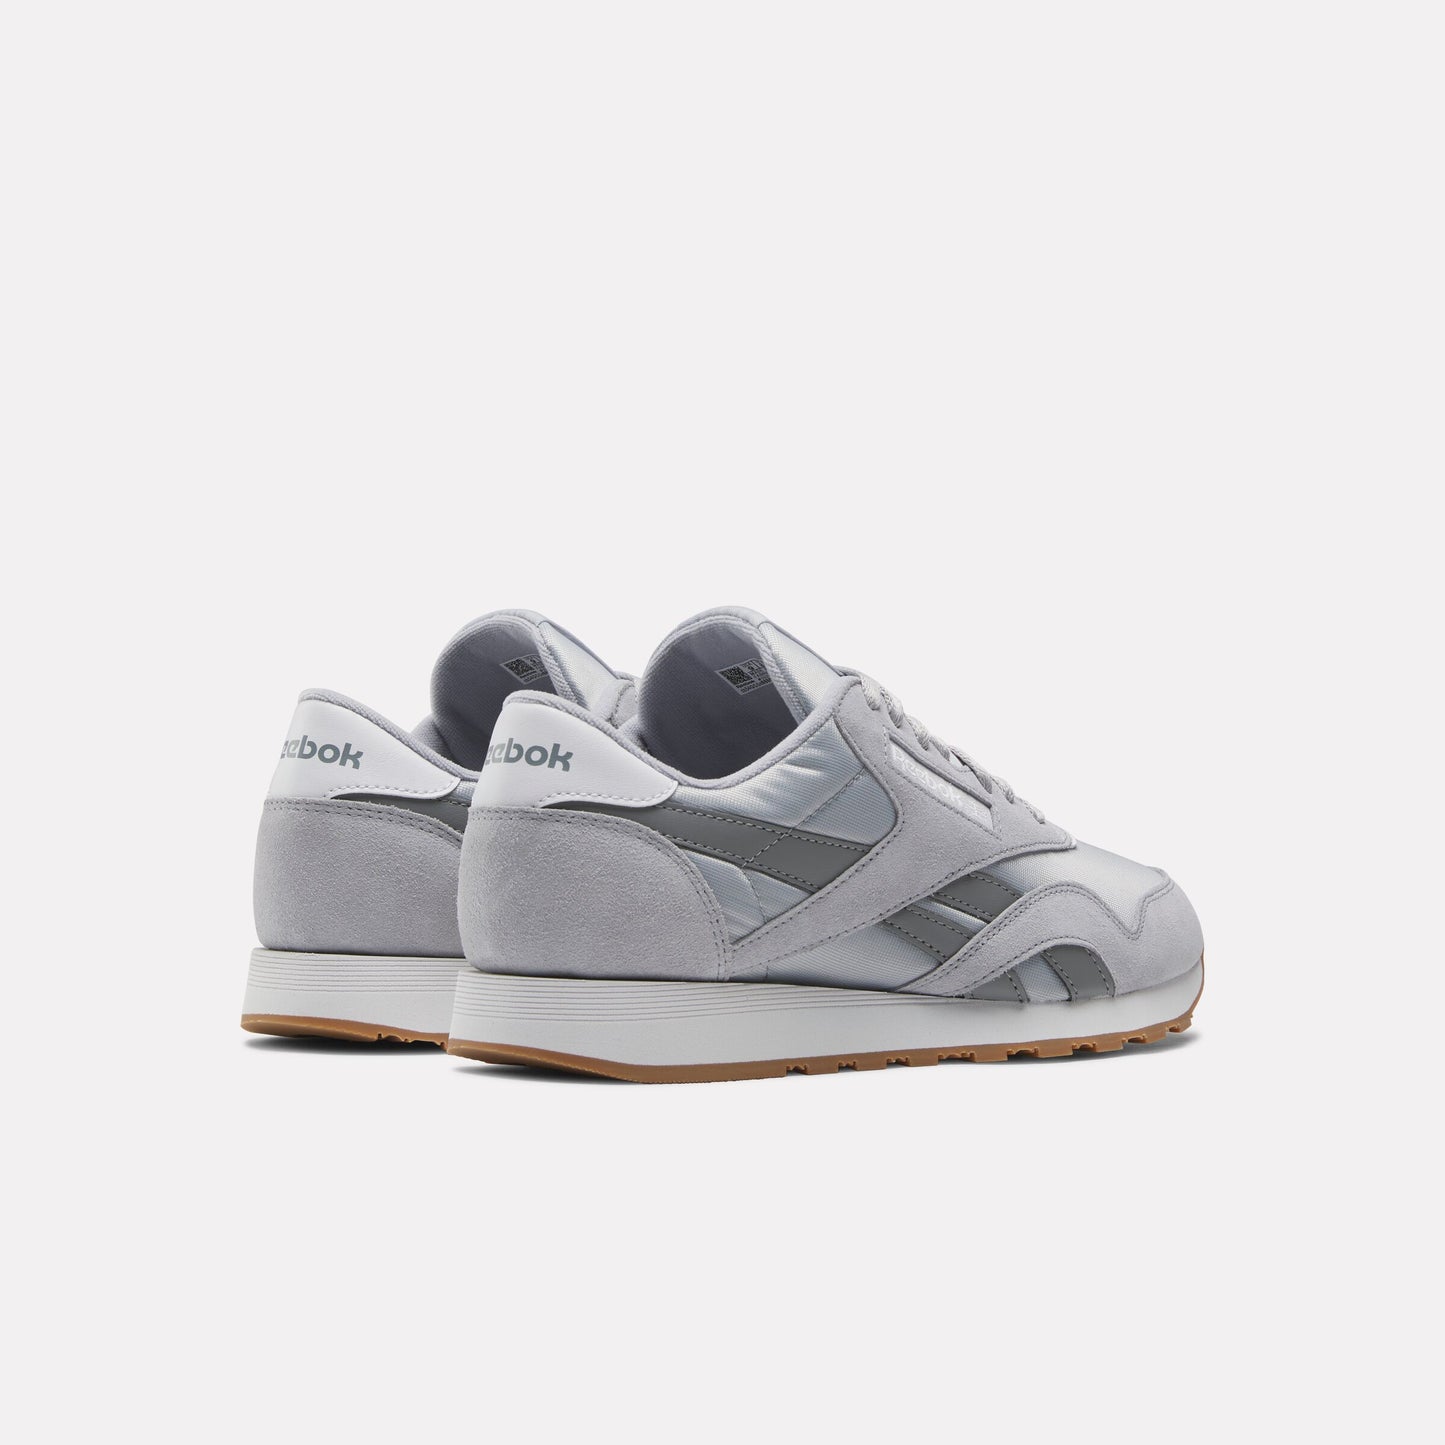 Classic Nylon Shoes Cold Grey 2/Pure Grey 5/Rbkle3